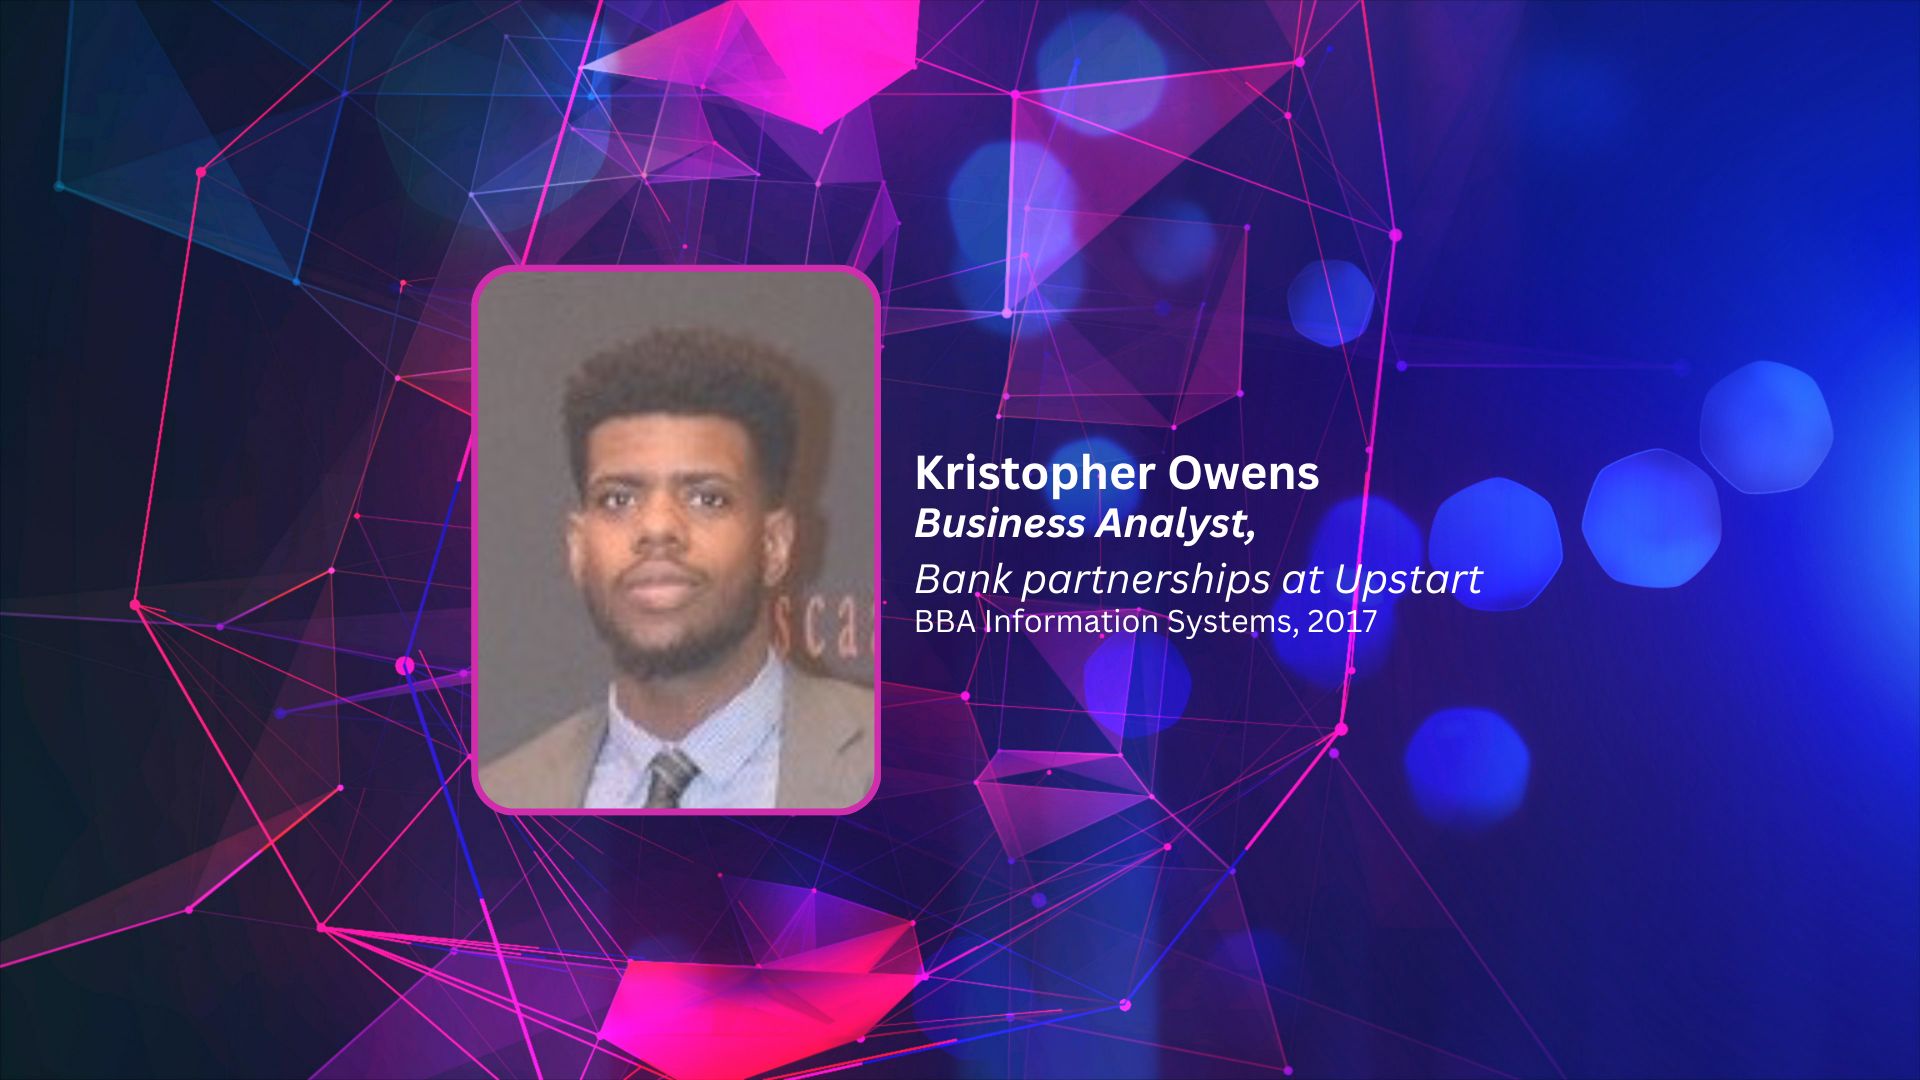 Kristopher Owens: Leading Data Analyst and Community Mentor at American Electric Power